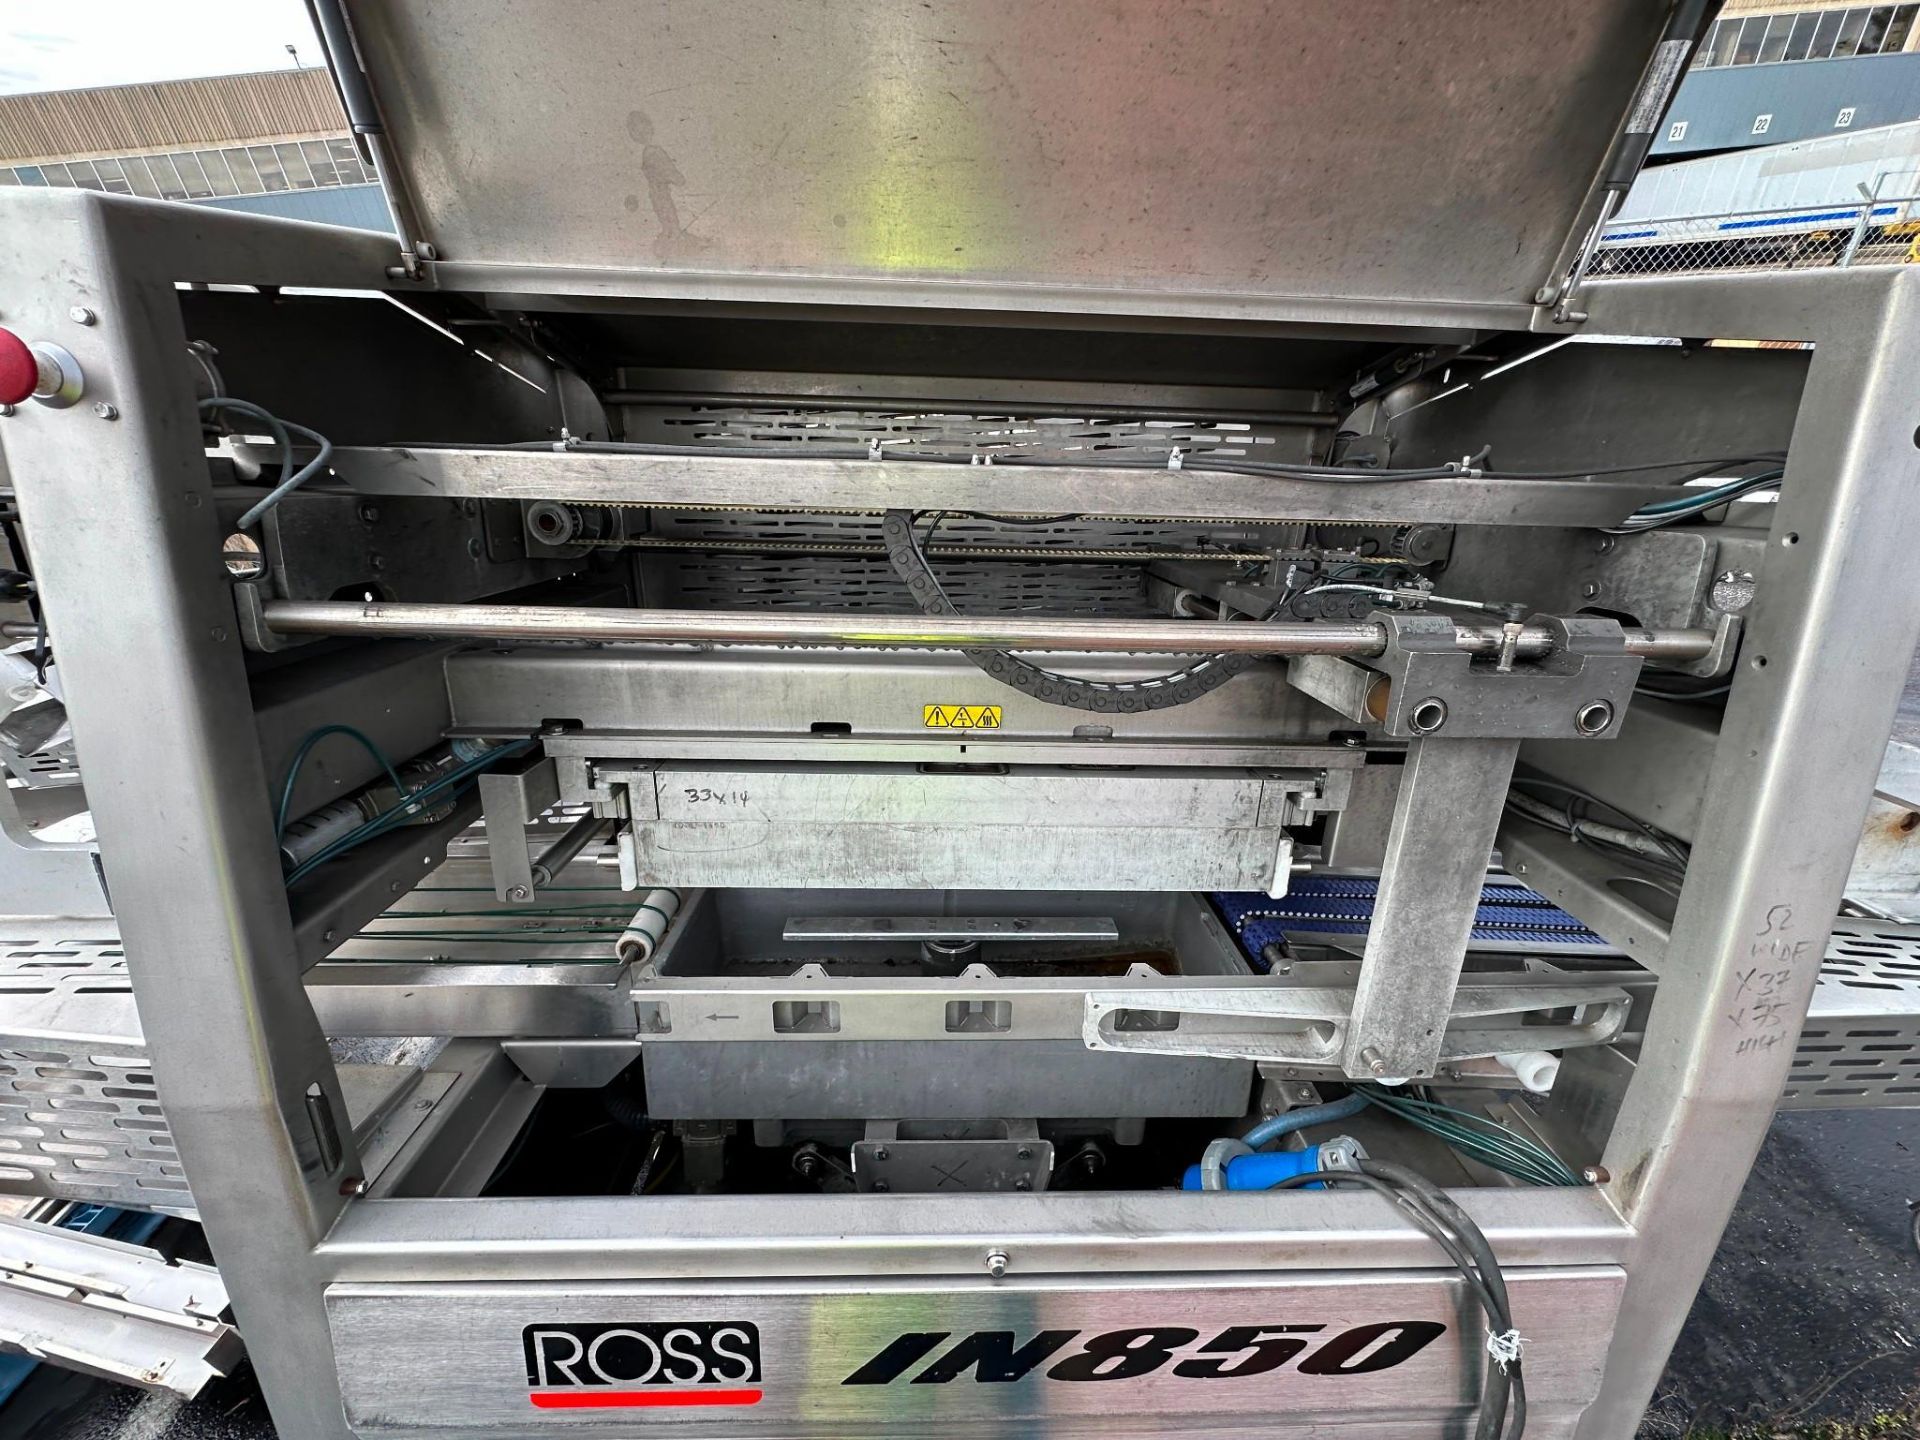 ROSS INPACK IN850 AUTOMATIC TRAY SEALER - Image 2 of 7